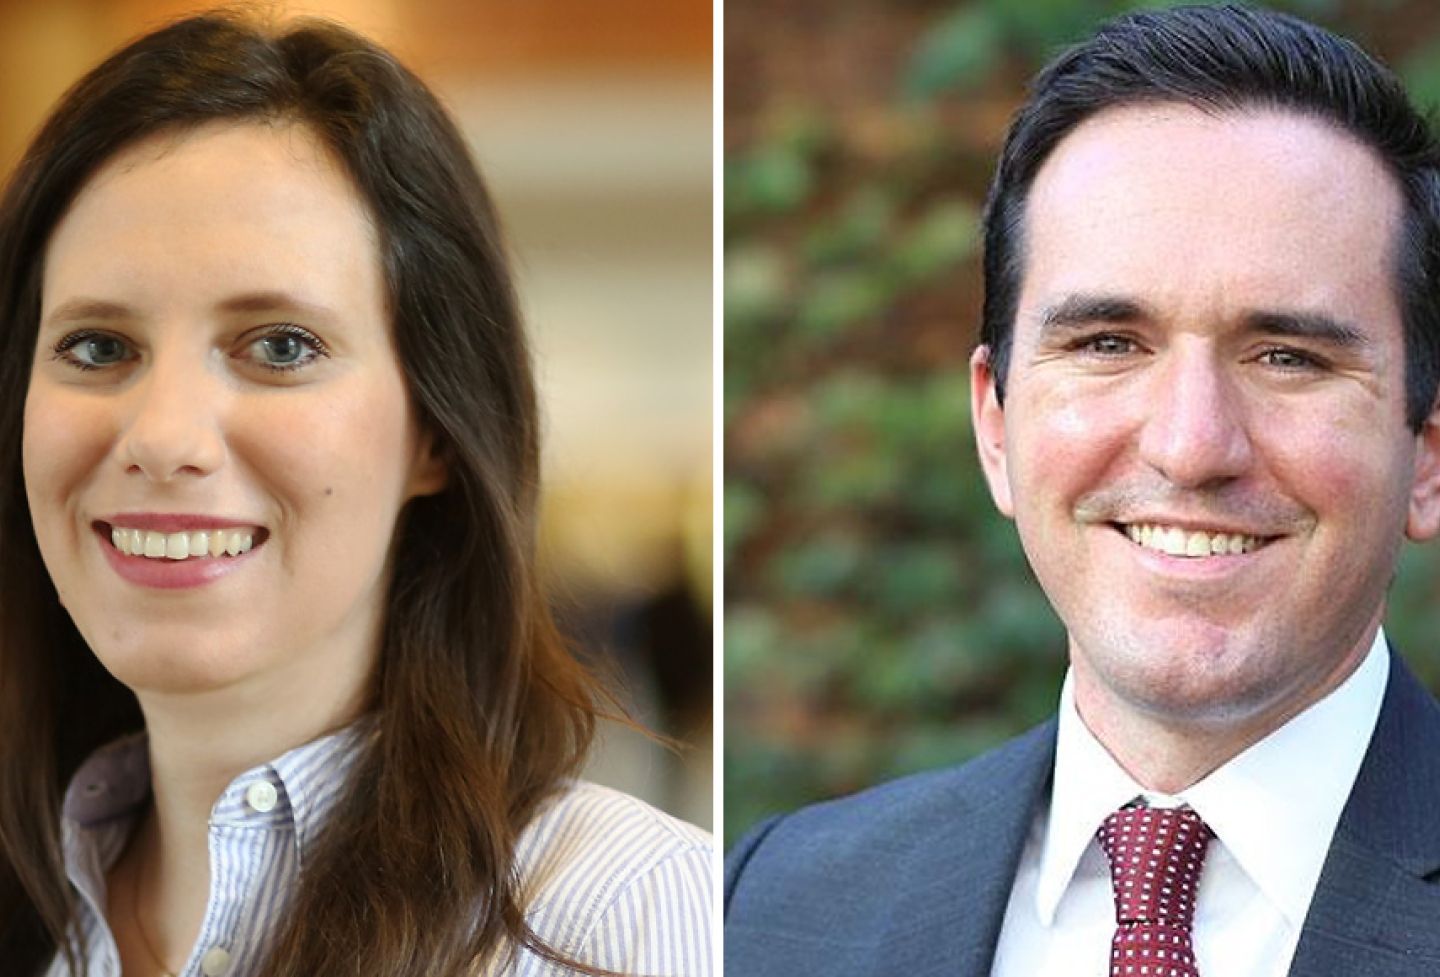 Jessica Wagner ’15 will clerk for the U.S. Supreme Court in the 2019 term, and Dan Richardson ’18 will serve as a Bristow Fellow for the U.S. Solicitor General’s Office.